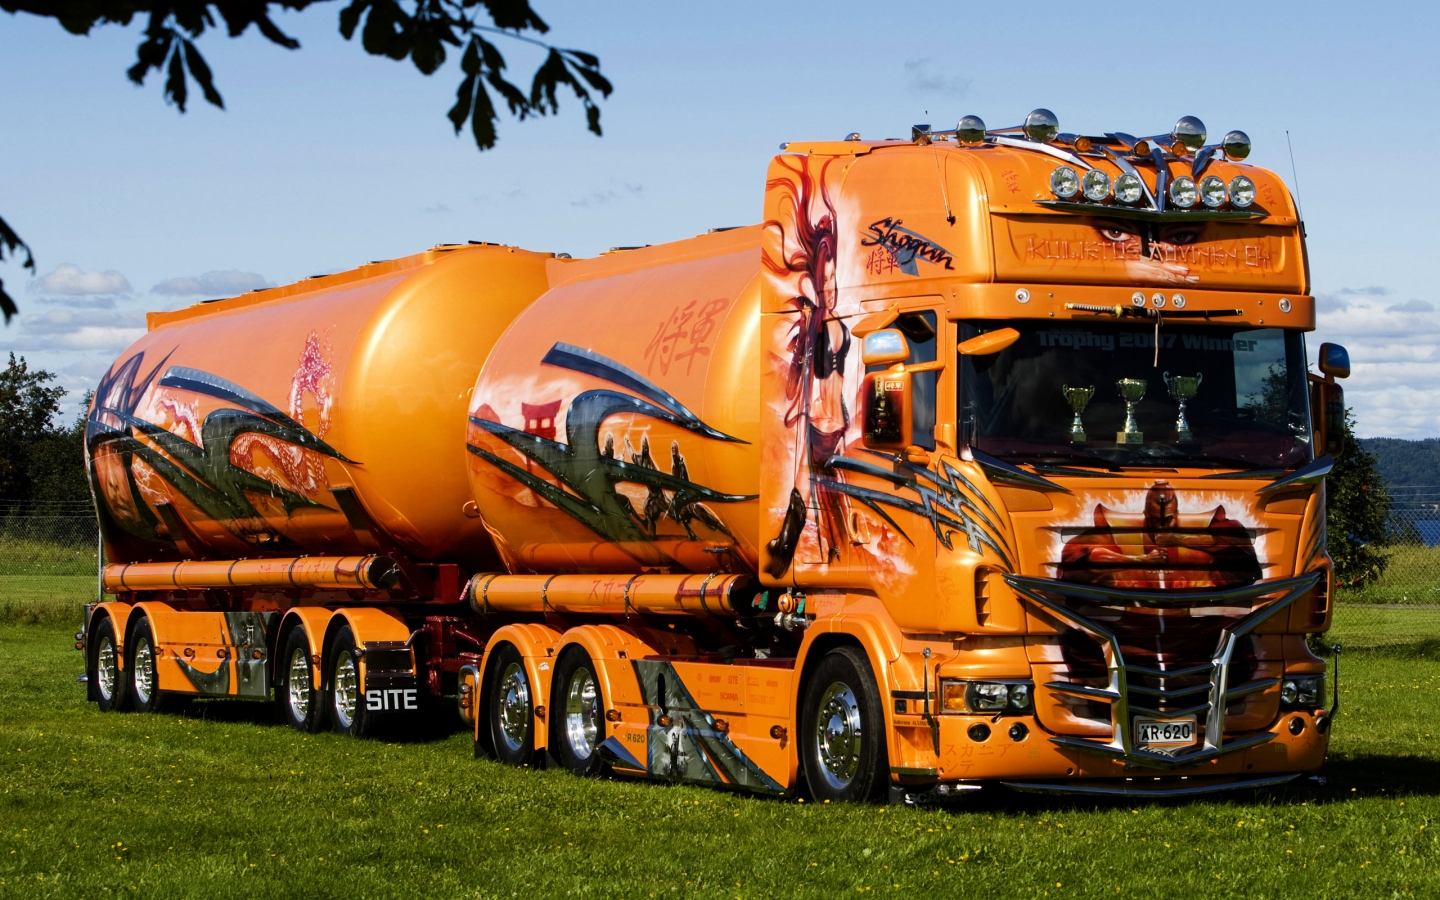 Scania Tanker for 1440 x 900 widescreen resolution